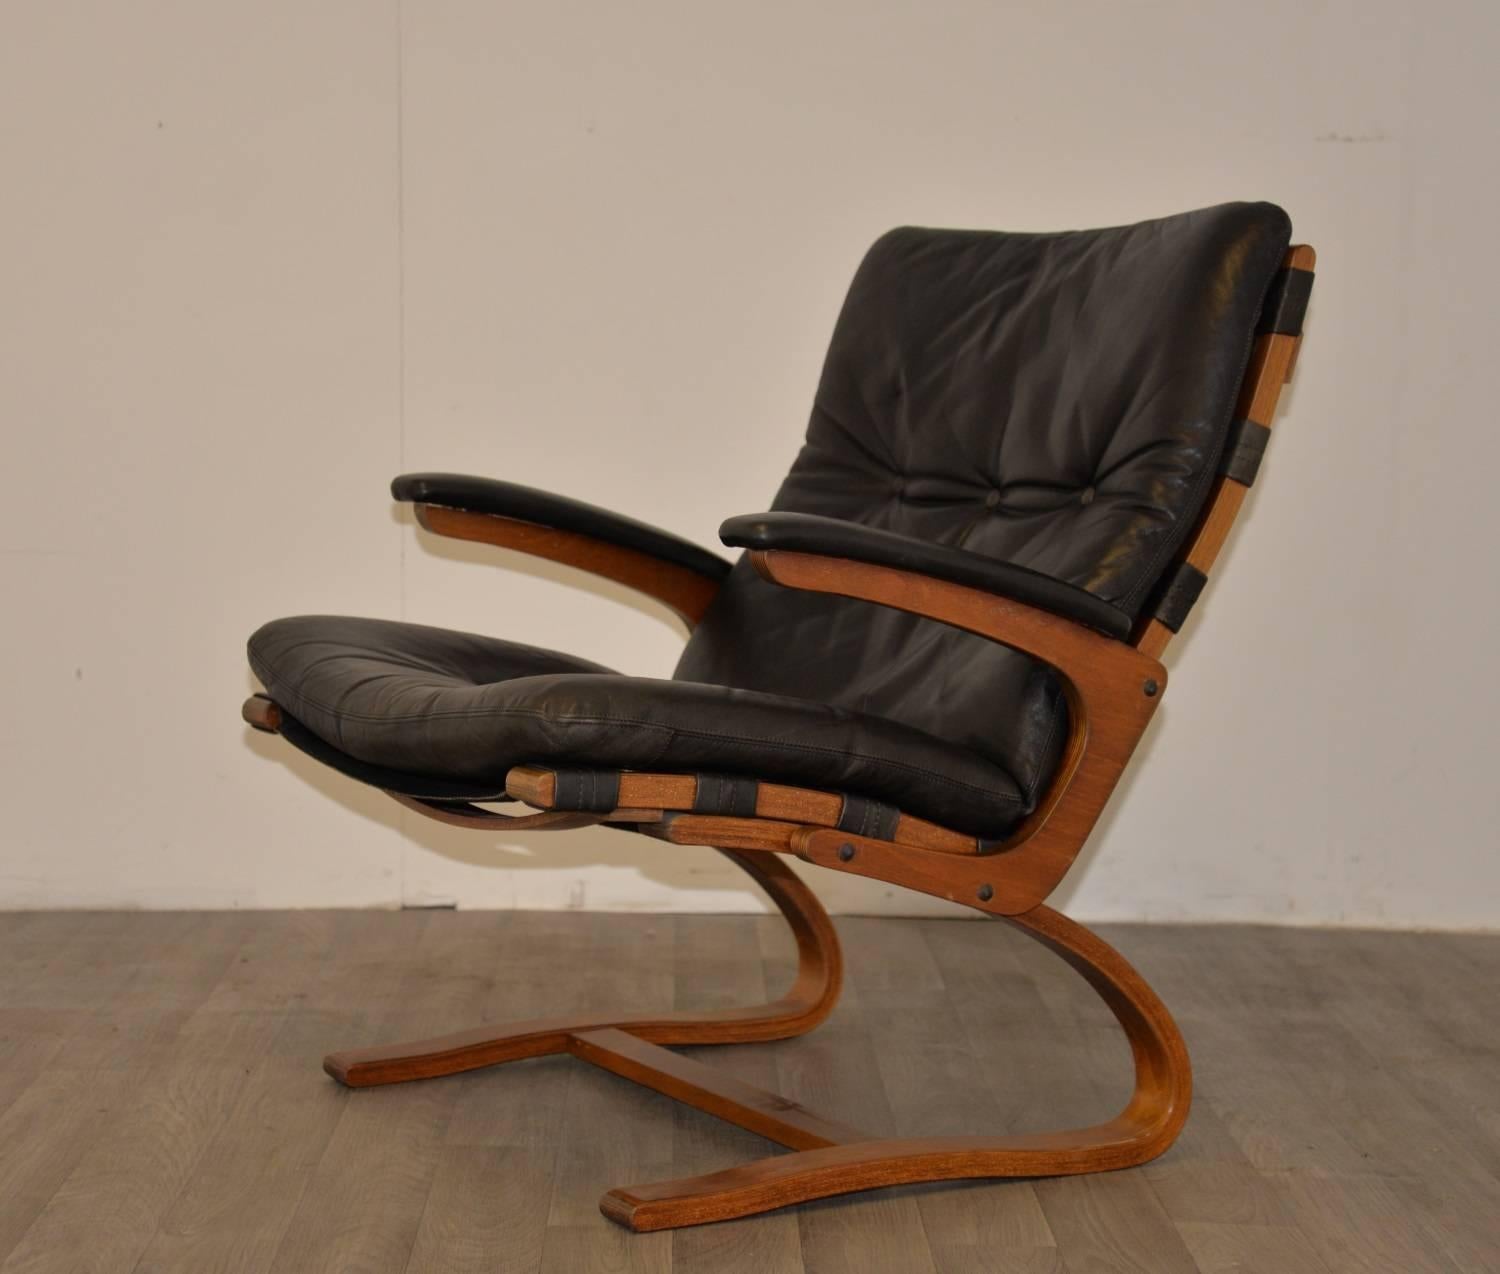 Discounted airfreight for our International customers (2 weeks door to door)

Vintage leather armchair in stunning black leather built by Sormani of Italy in 1963. Standing on a rosewood wooden frame and upholstered in stunning soft back leather.